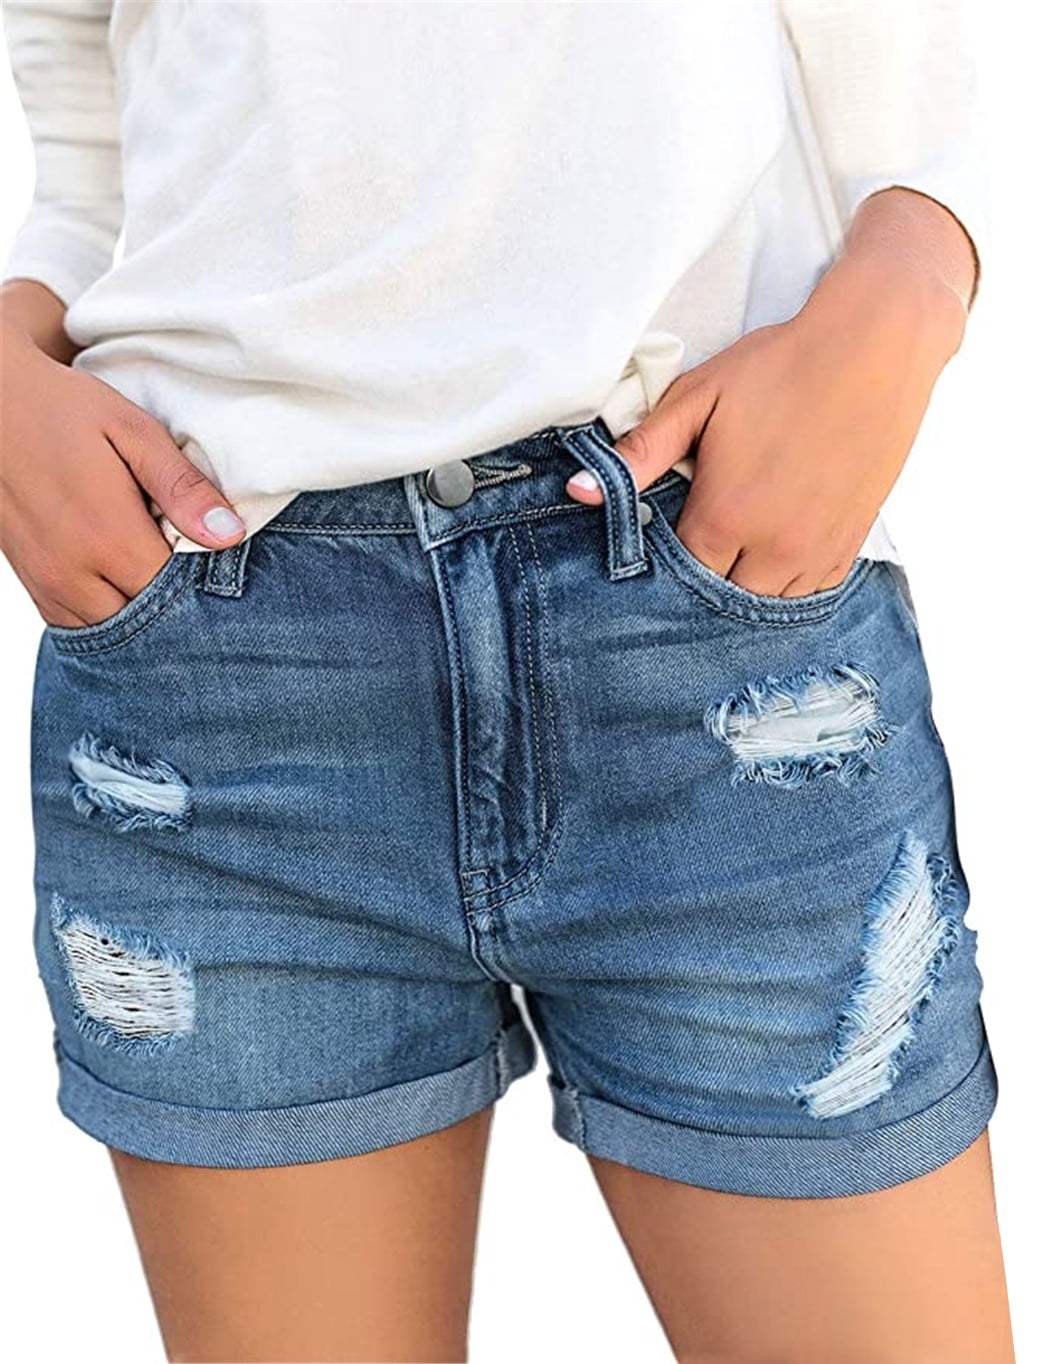 with Shorts Shorts Jeans Denim ONLYSHE Blue Women Stretchy for M Light Pockets